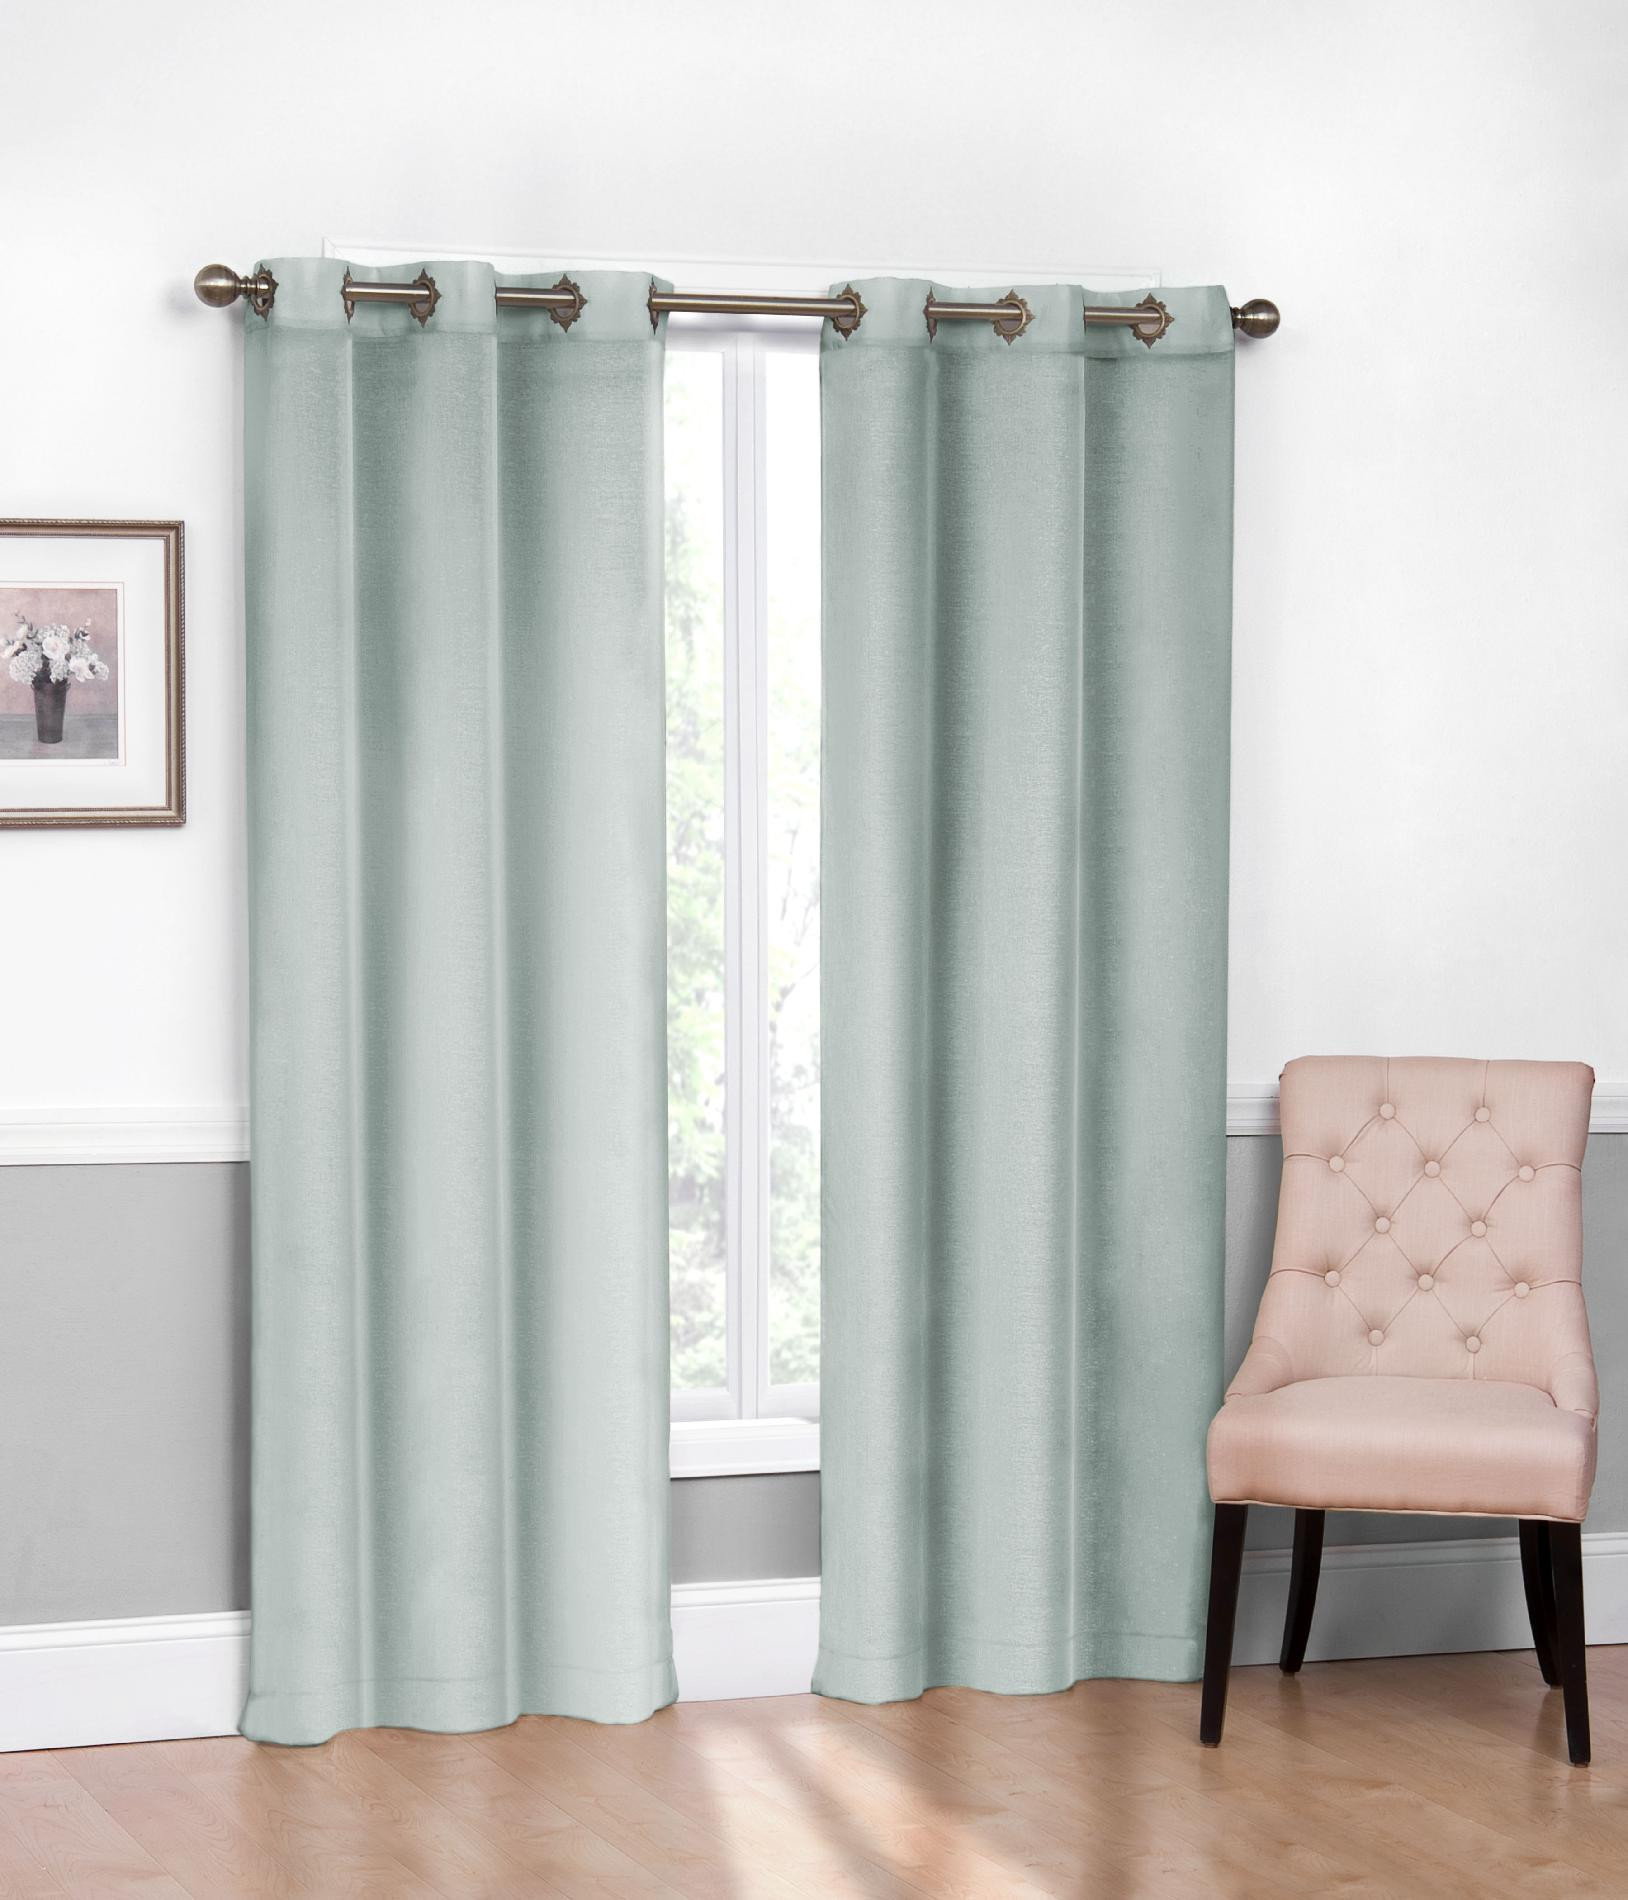 Sears Curtains For Living Room
 Curtain Panels 2 Piece Covered in Style with Sears